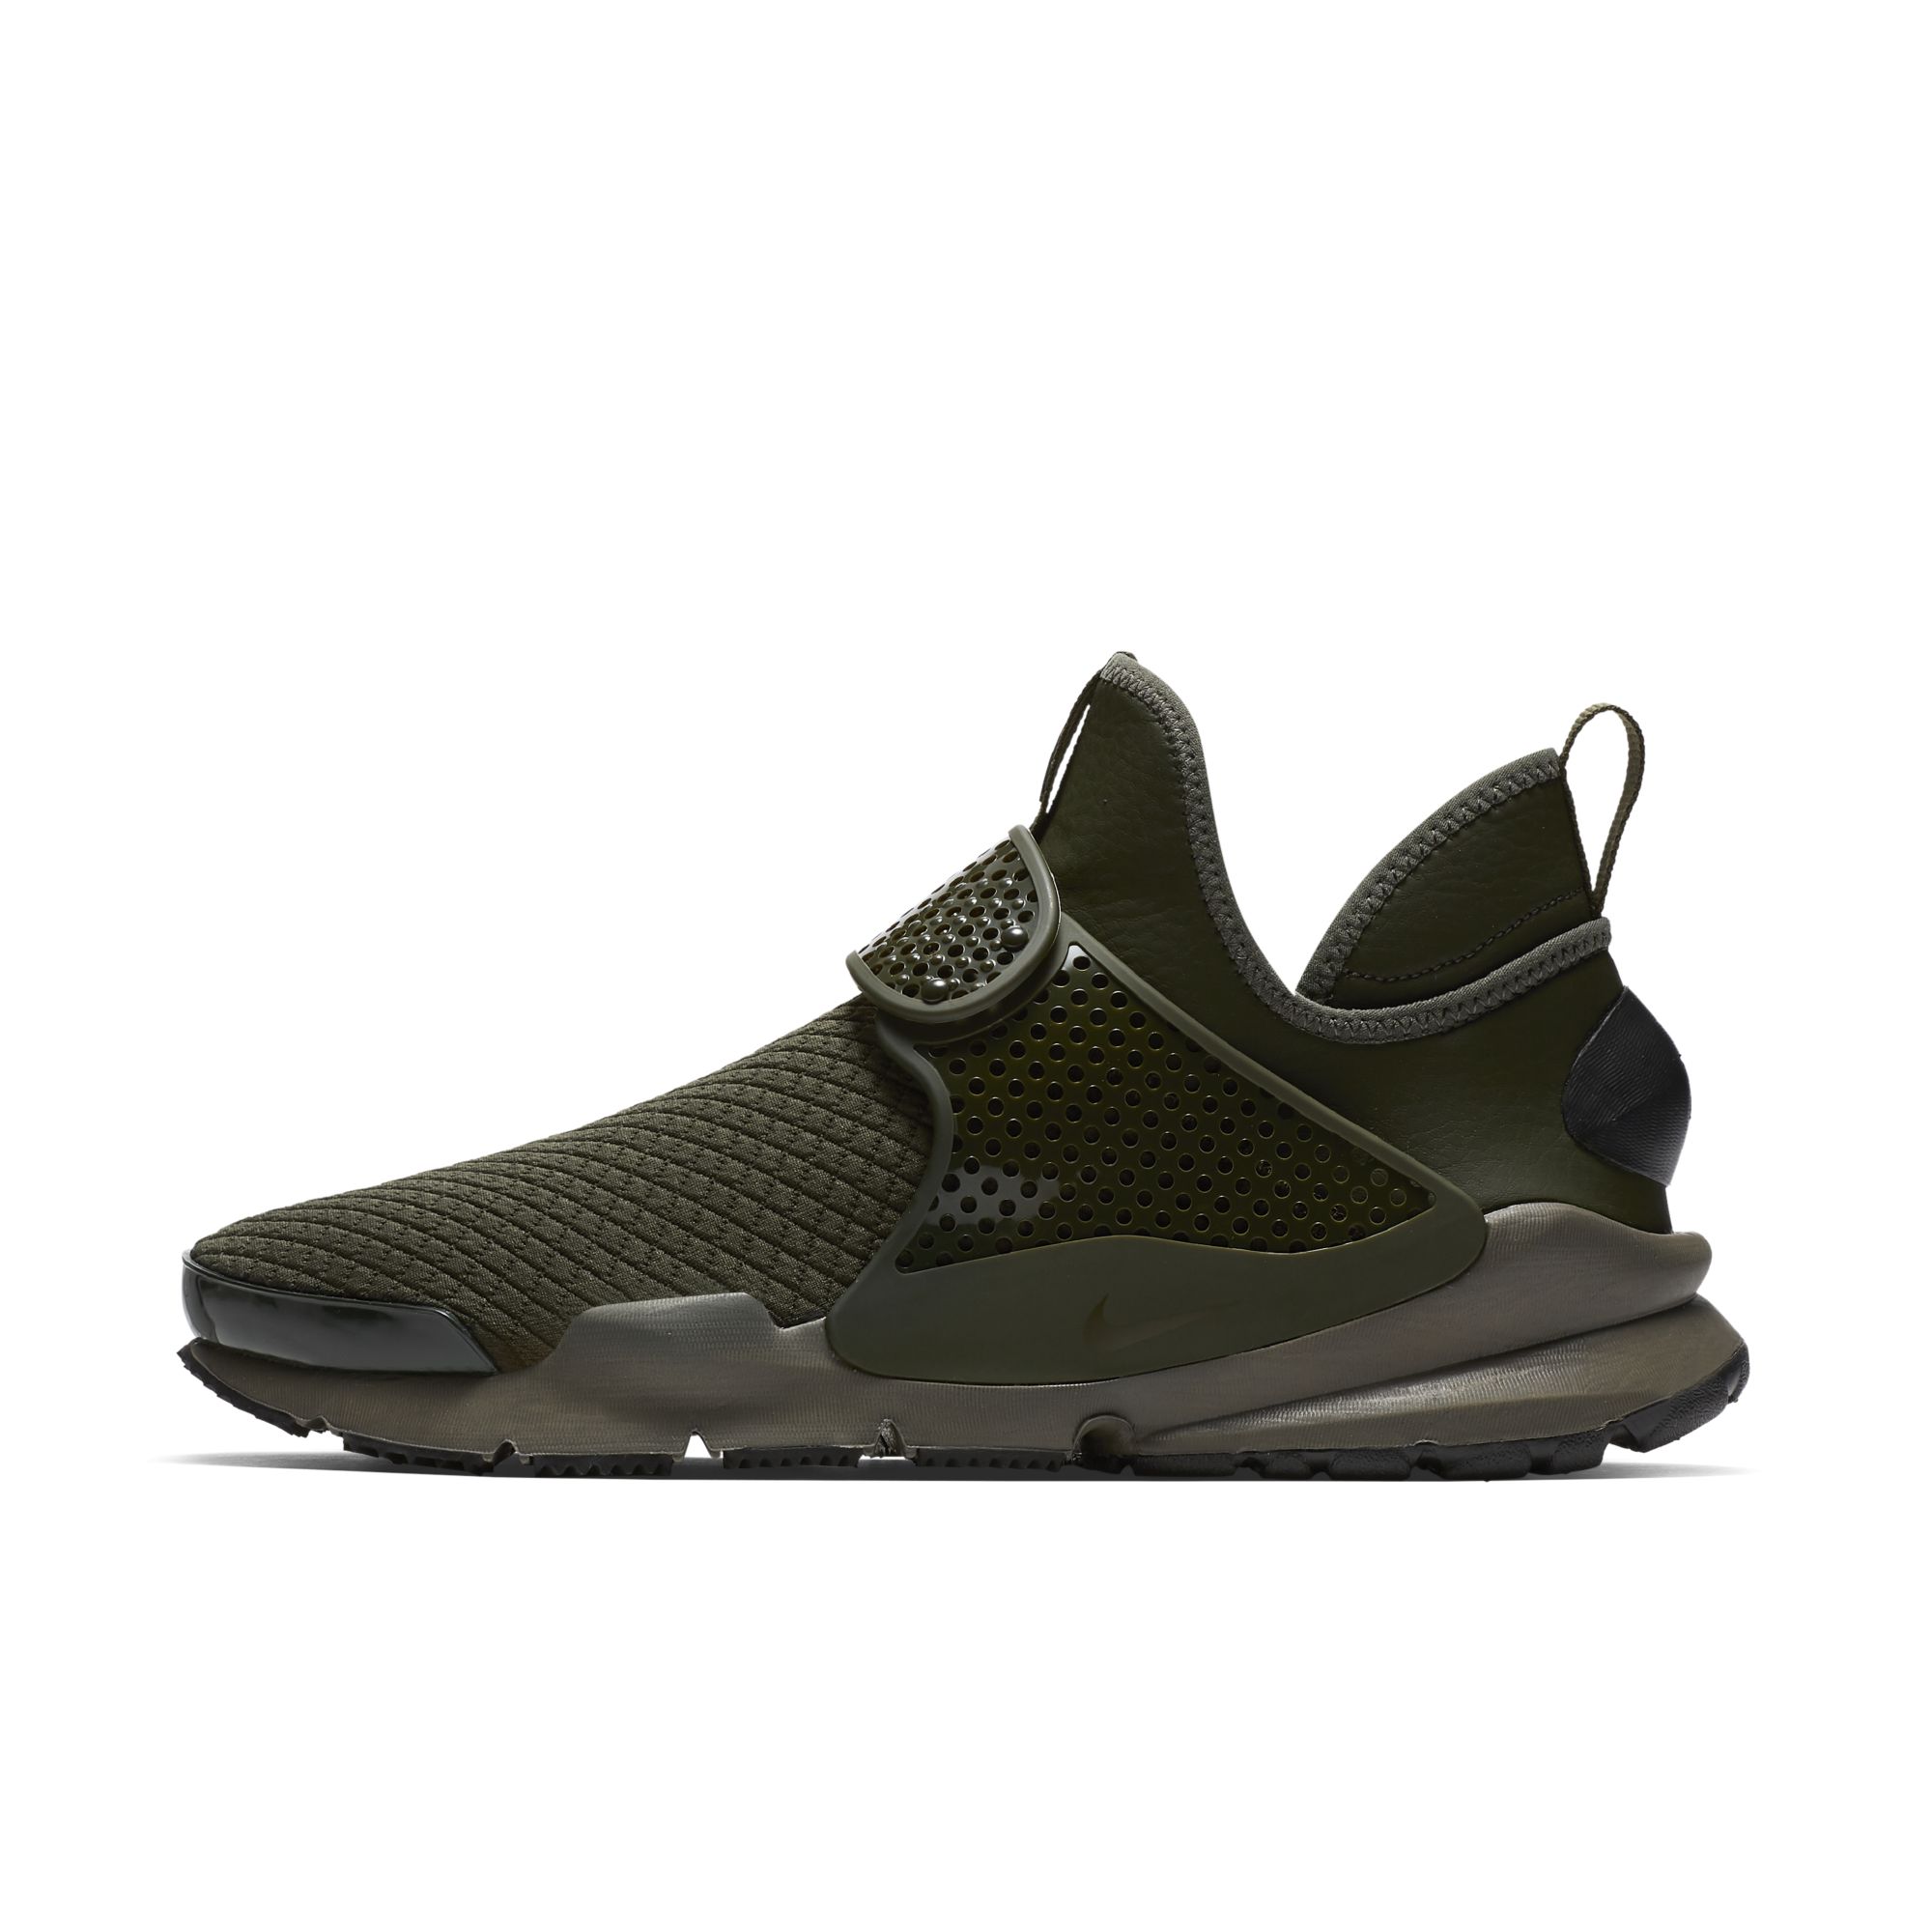 The Nike Sock Dart Mid is Now a Thing 